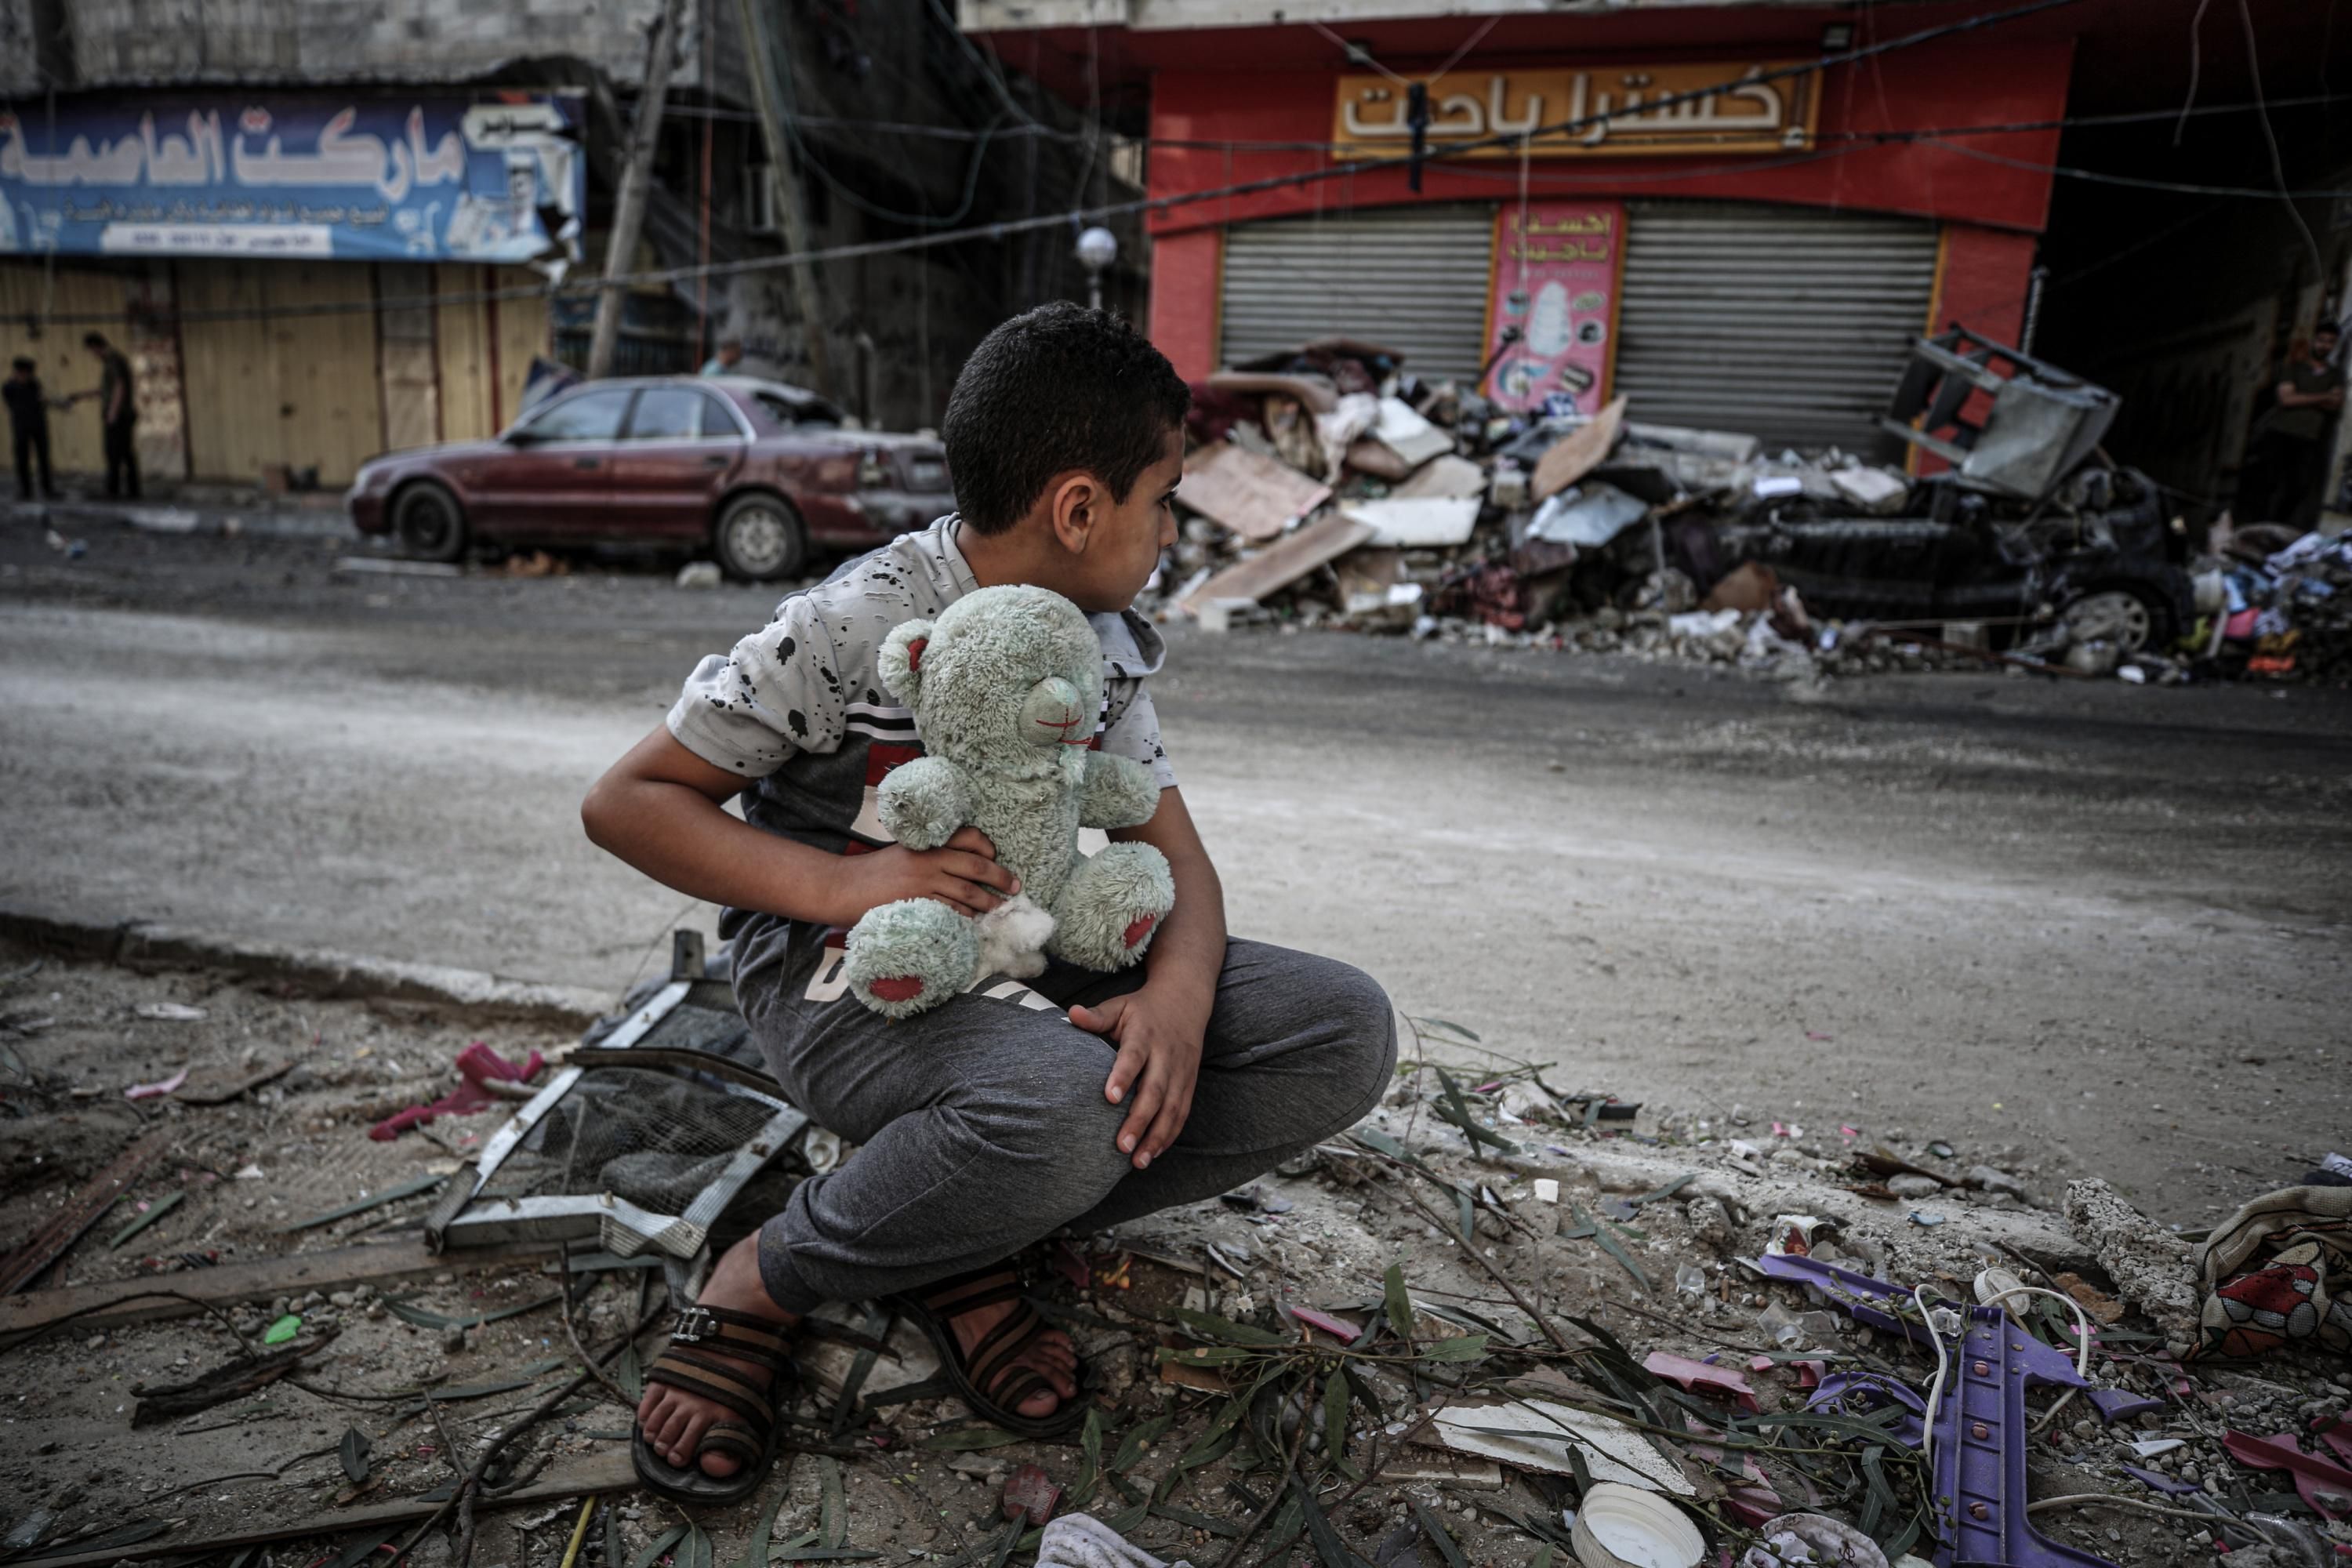 A boy with his teddy bear sits on the ruins of buildings destroyed by Israeli airstrikes in the Sheikh Ridvan neighborhood in Gaza City on May 19, 2021. (Photo: Ali Jadallah/Anadolu Agency via Getty Images)